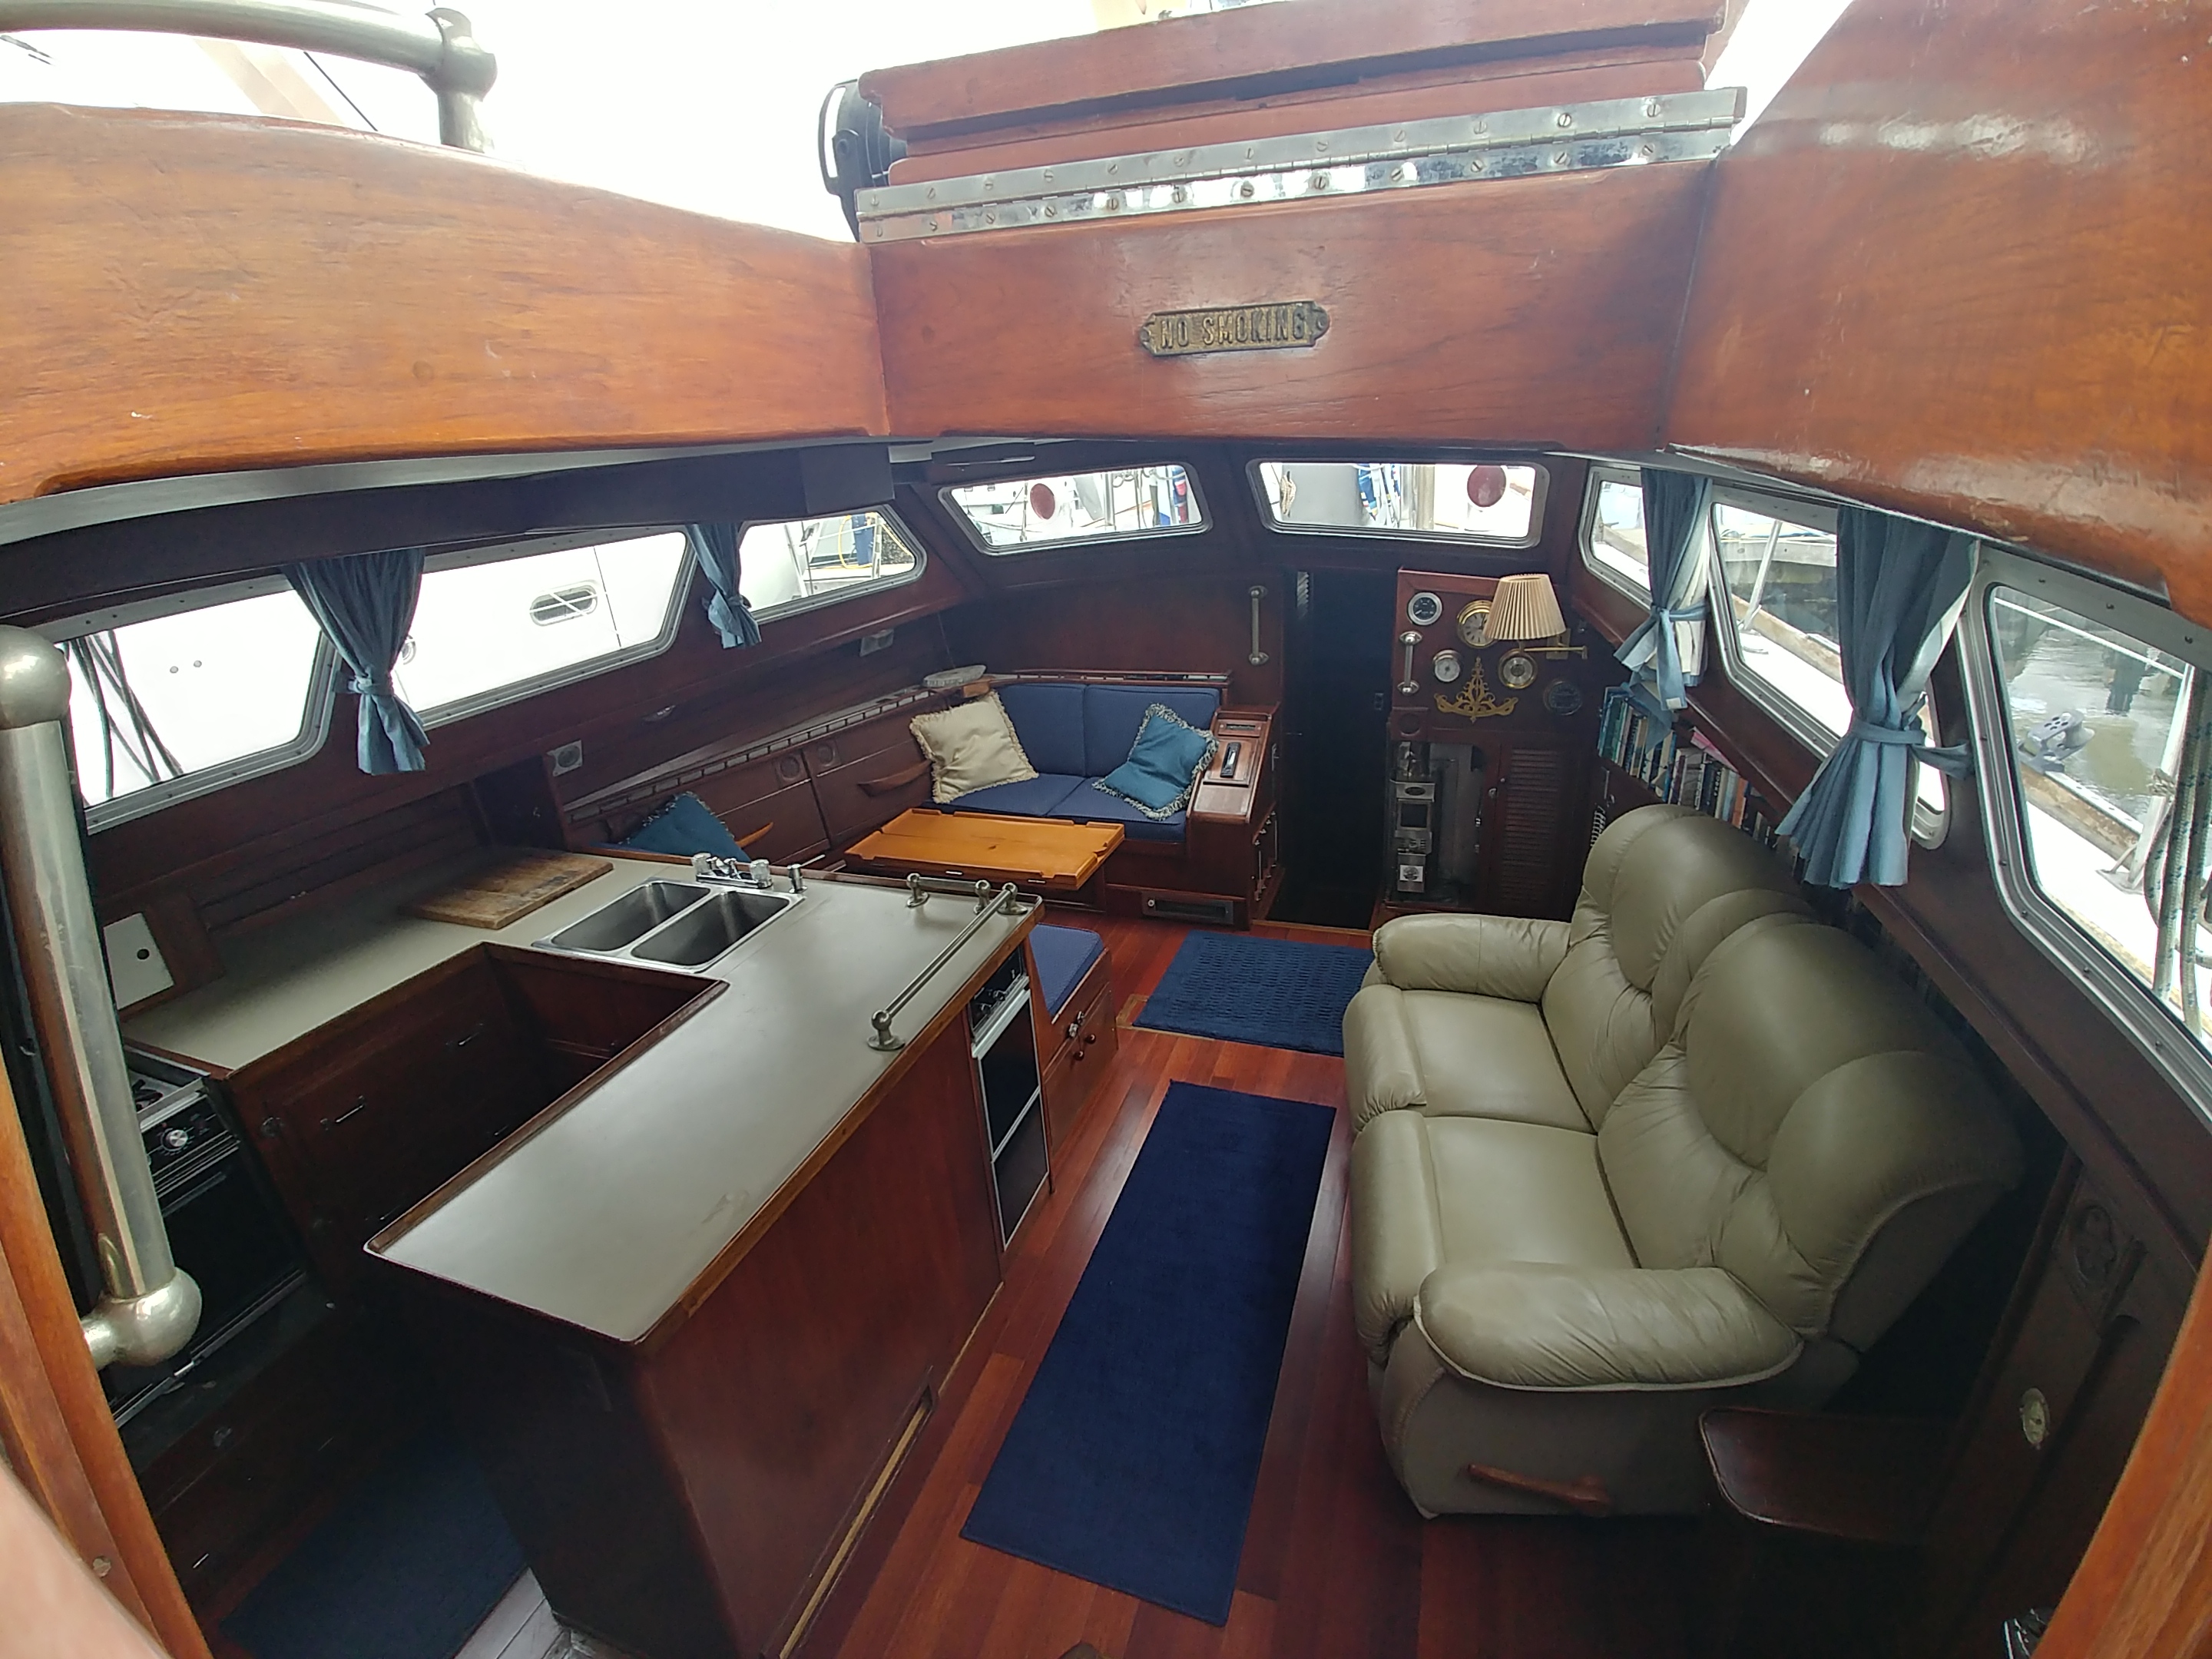 1974 Challenger  50' Sailboat for sale in South Park Village, WA - image 4 